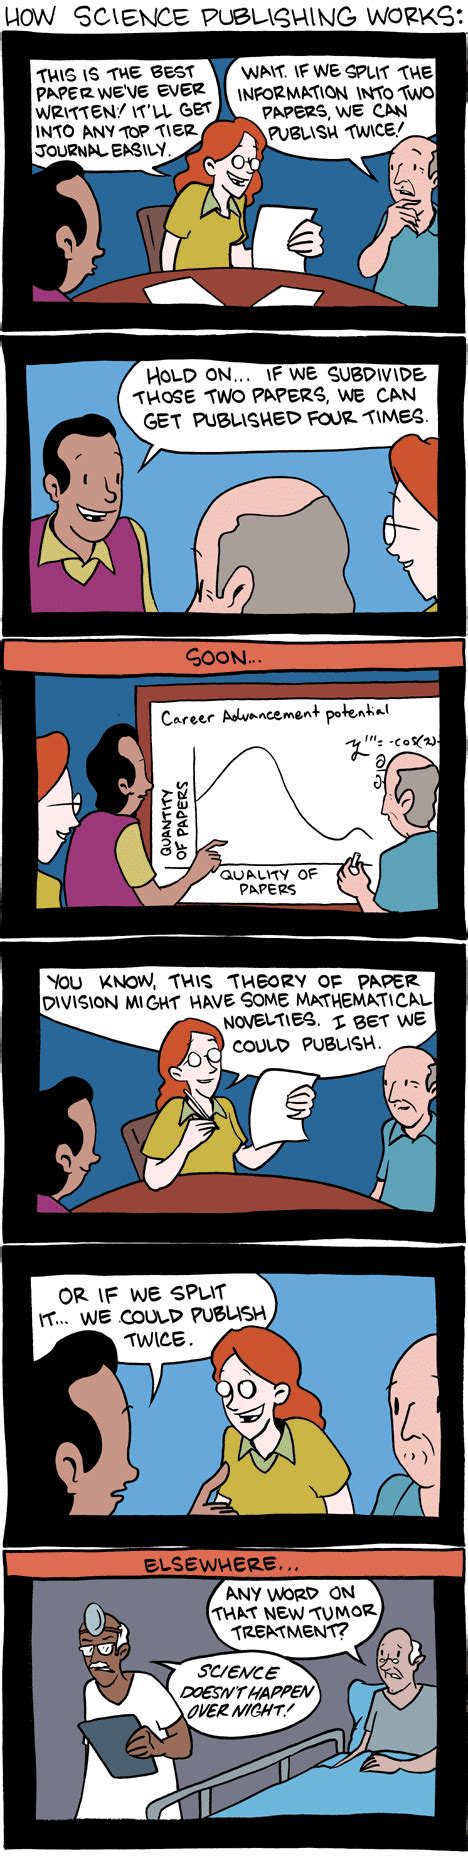 Academic Publishing Another Brutal Comic Matters Mathematical